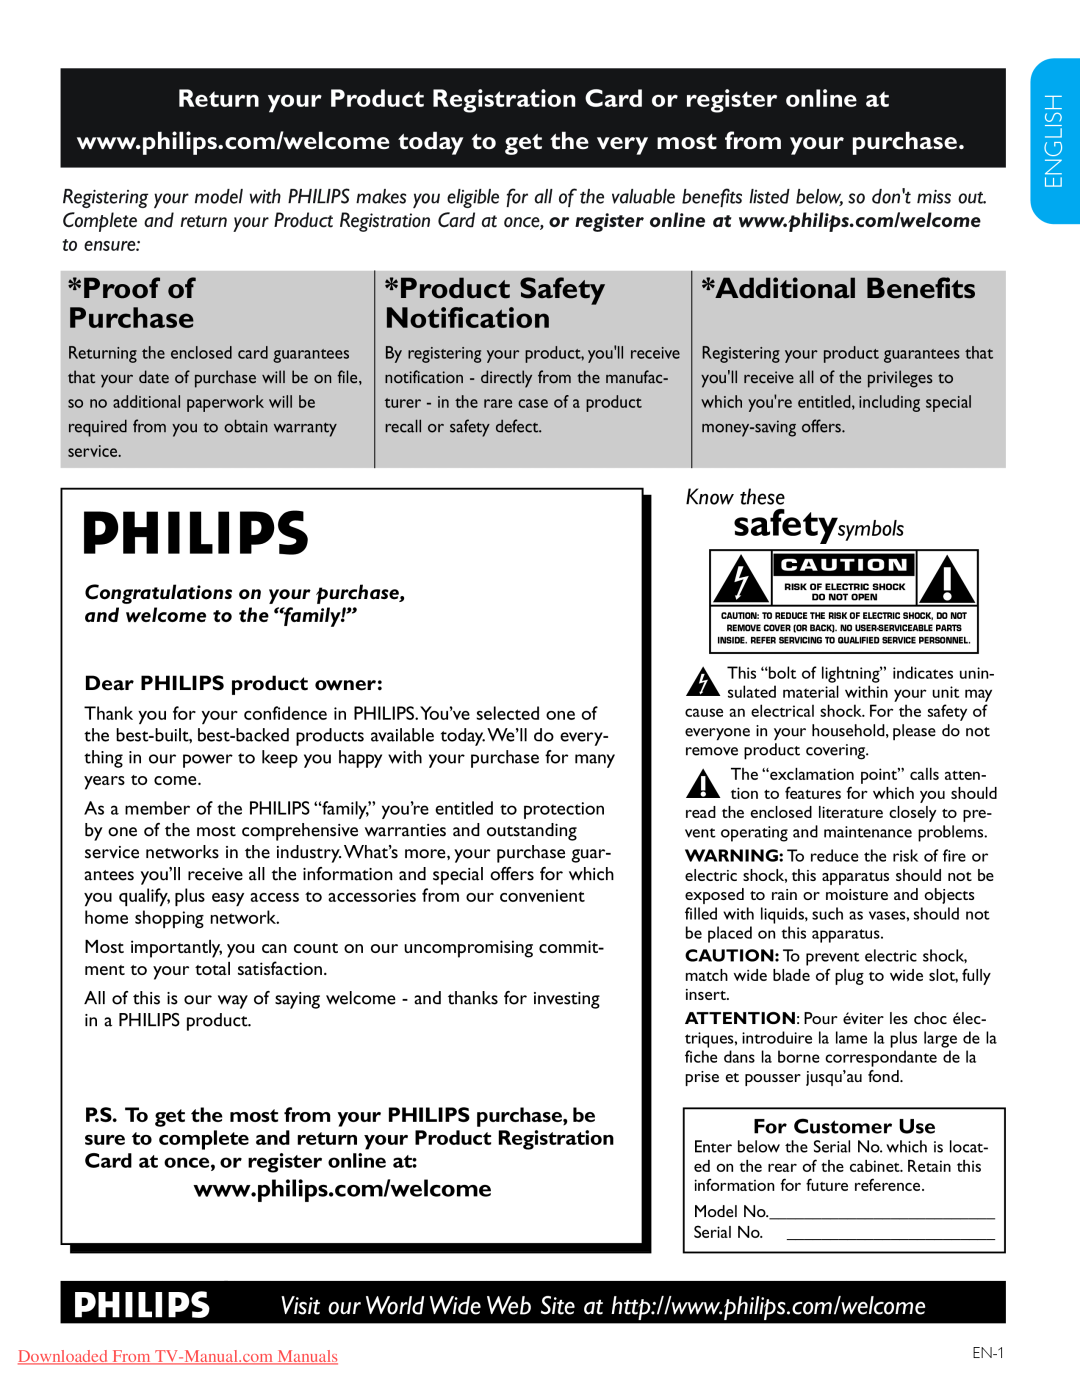 Philips 57PFL7603D, 47PFL7603D Française English, Proof of, Product Safety, Additional Benefits, Purchase, Notification 